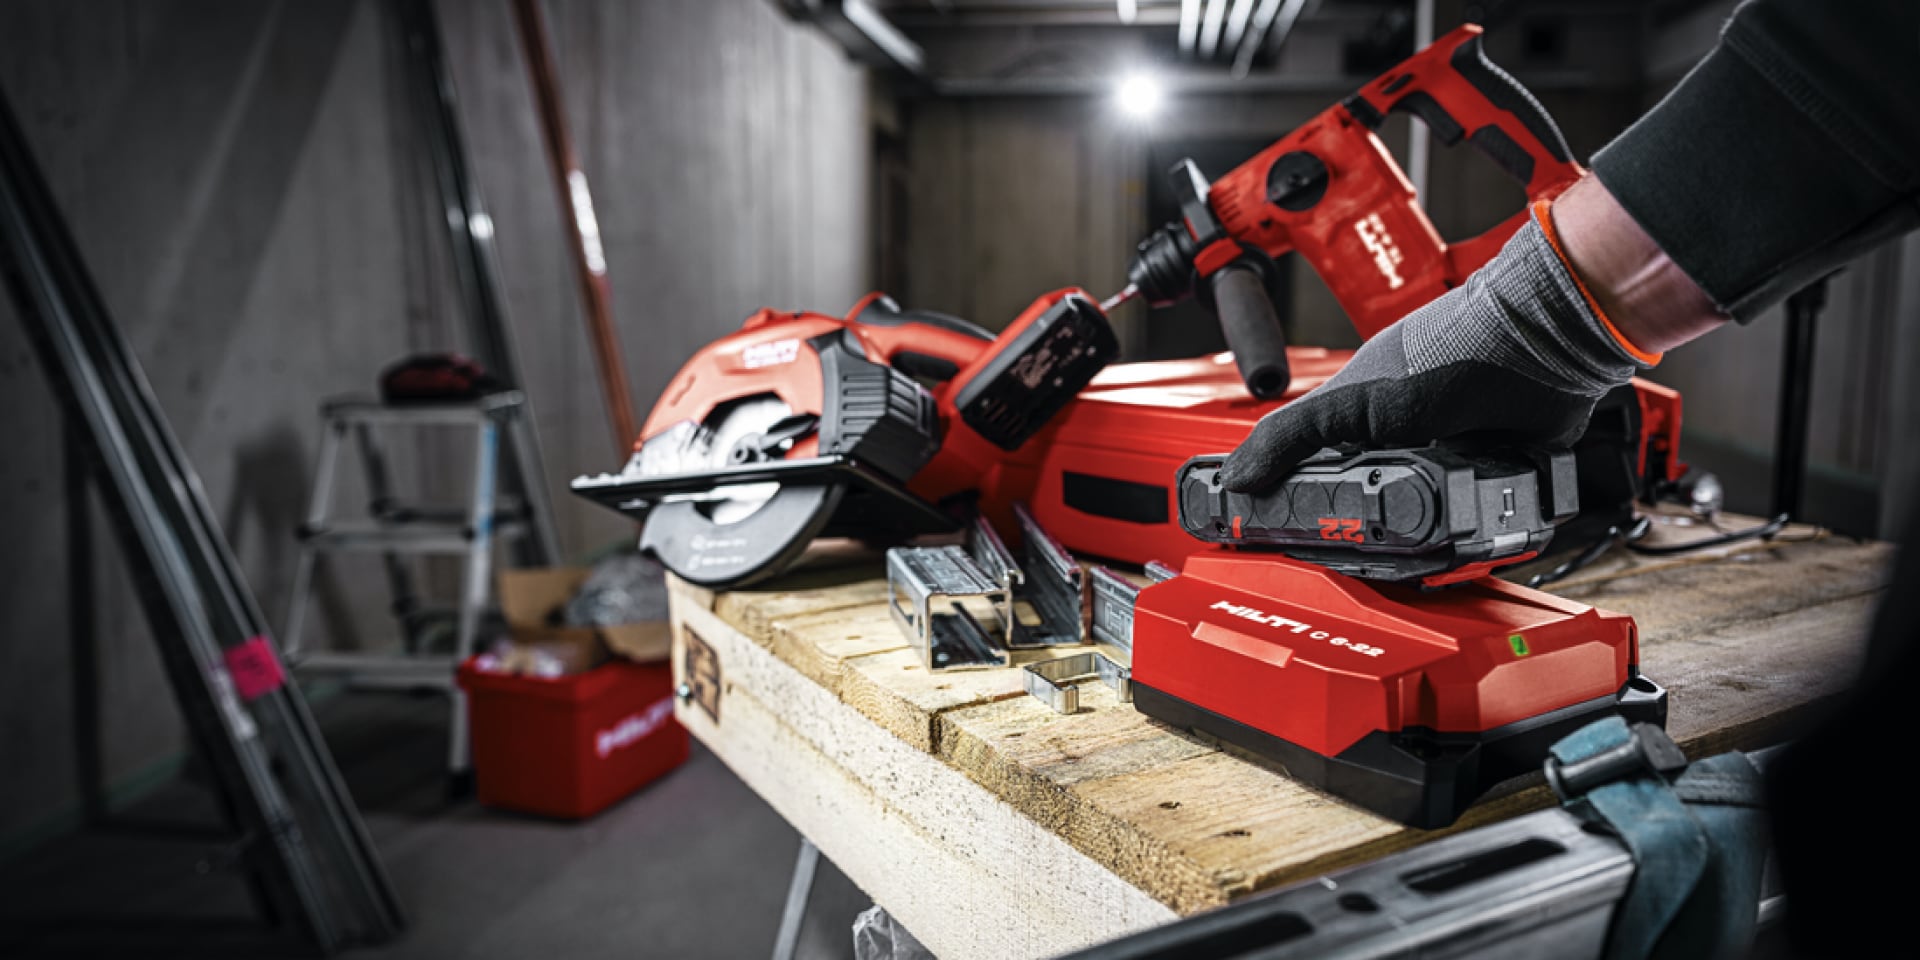 Cordless tools and battery charging in a workshop